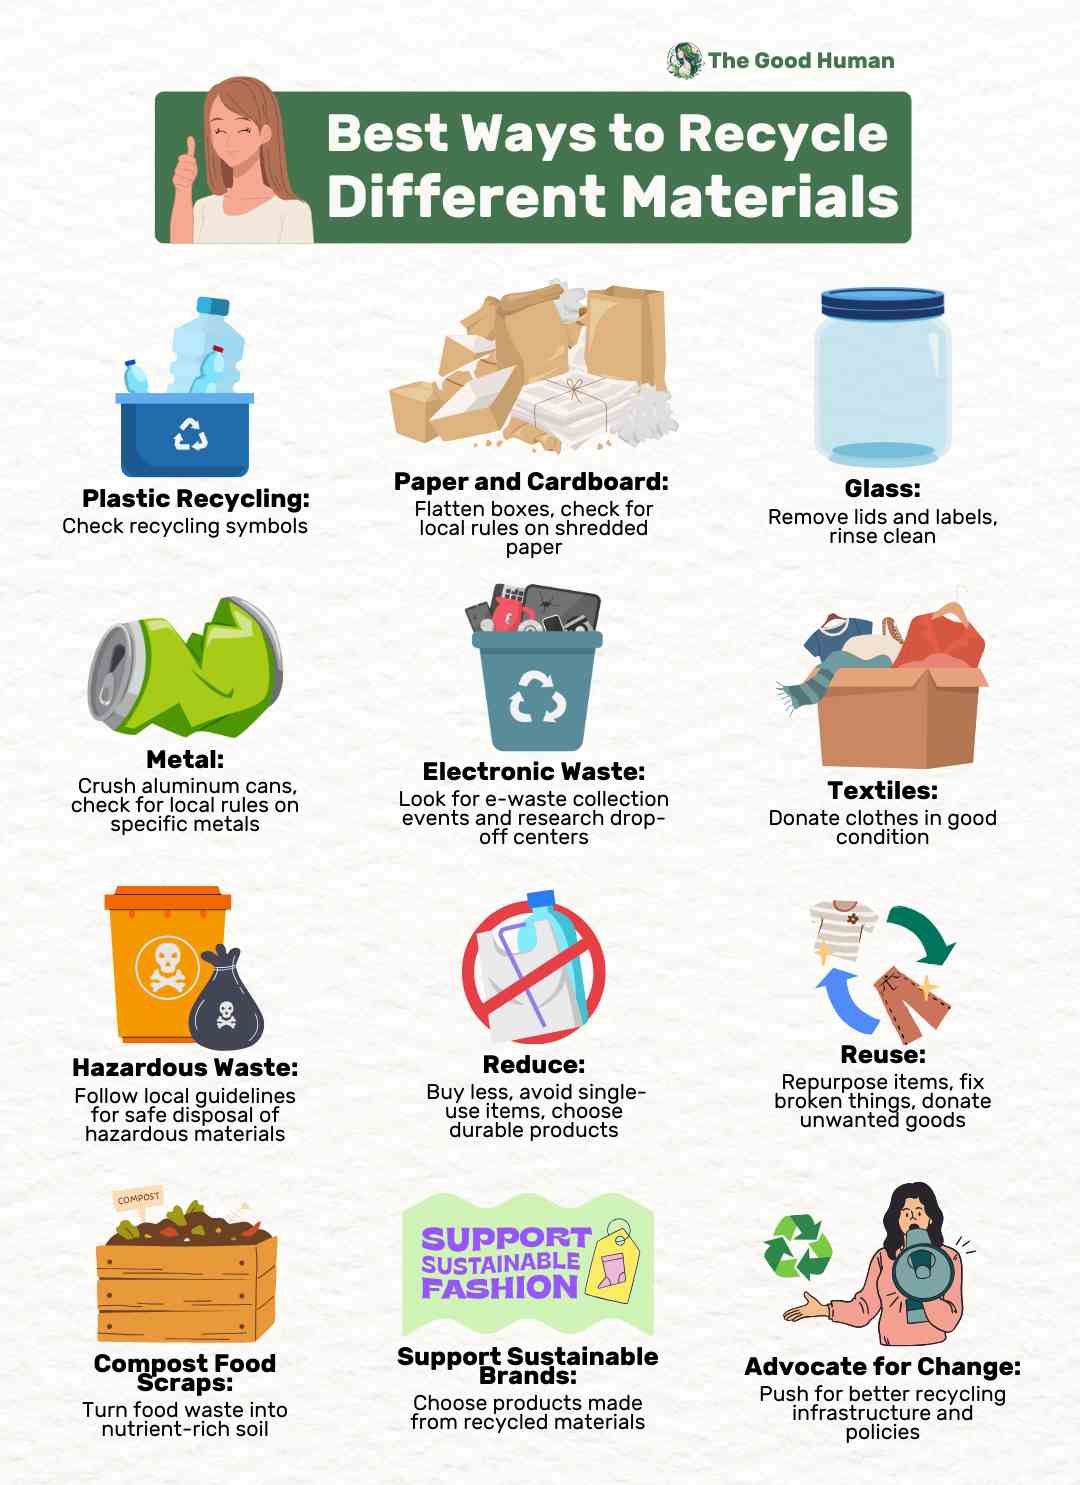 The best ways to recycle different materials.